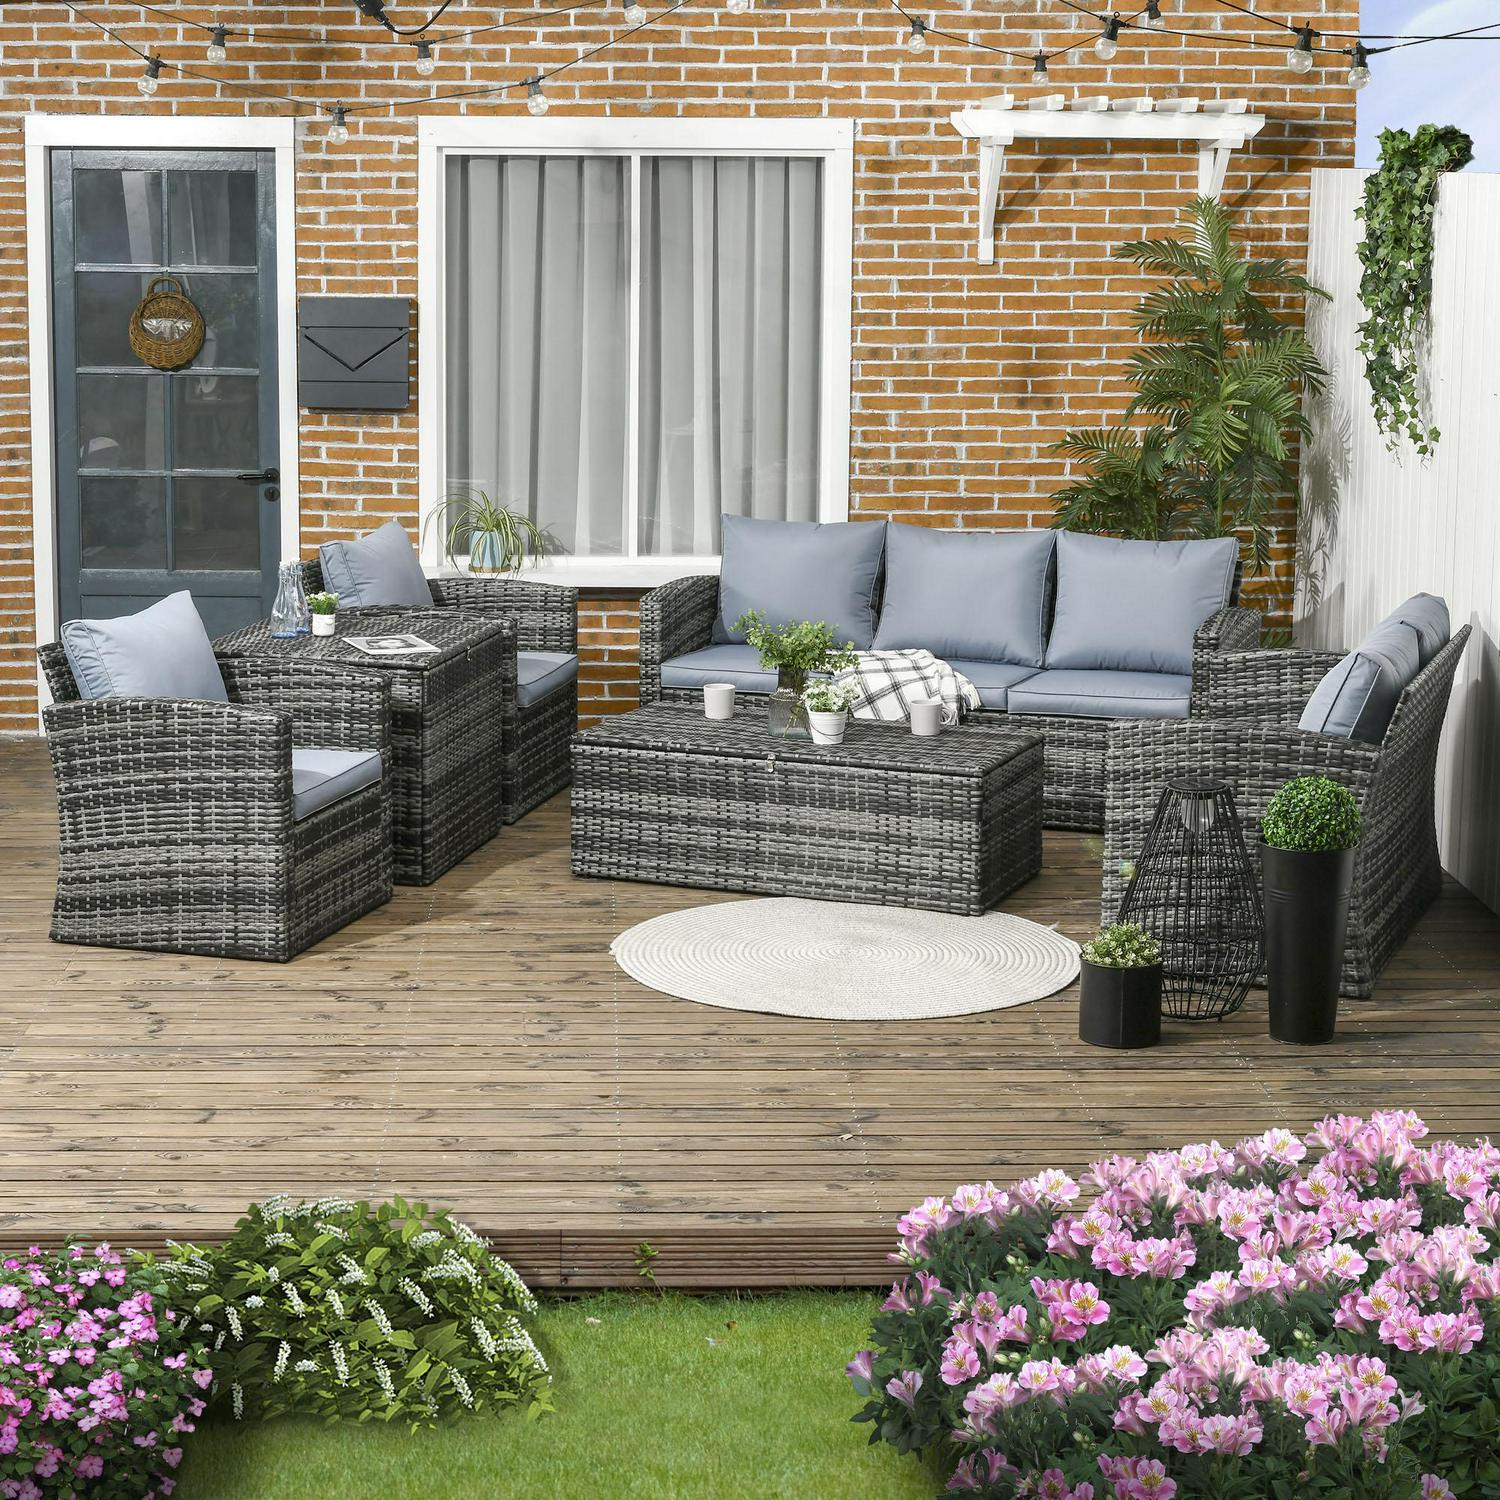 6 Piece Outdoor Rattan Wicker Sofa Set Sectional Patio Conversation Furniture W/ Storage Table And Cushion Mixed Grey